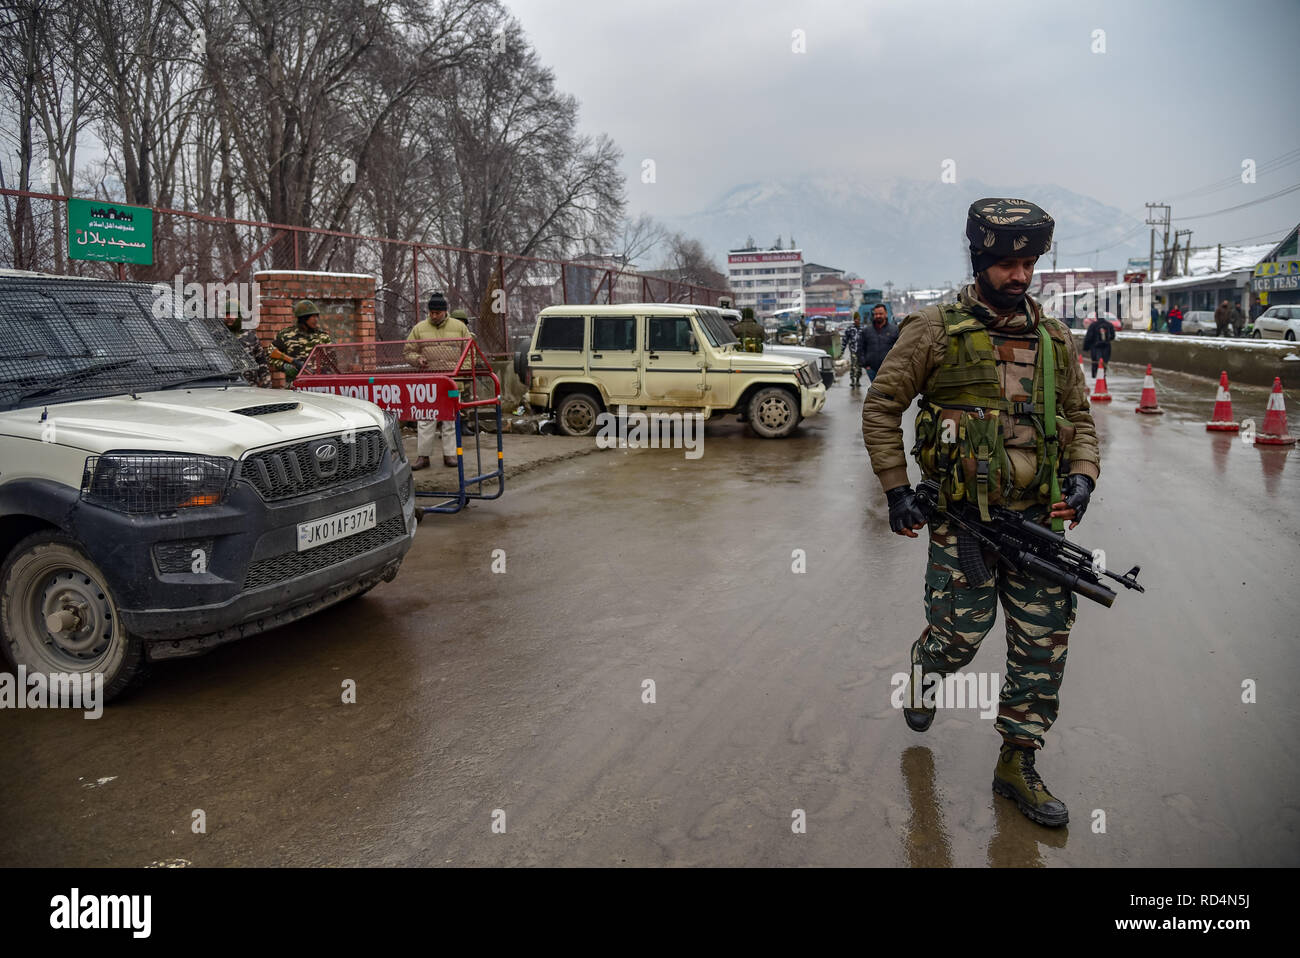 An Indian army-man seen Patrolling near the site of explosion in Srinagar. According to Police, at least five members of government forces were injured on Thursday in a grenade explosion blamed on rebels fighting against Indian rule in Indian-controlled Kashmir's main city. Stock Photo